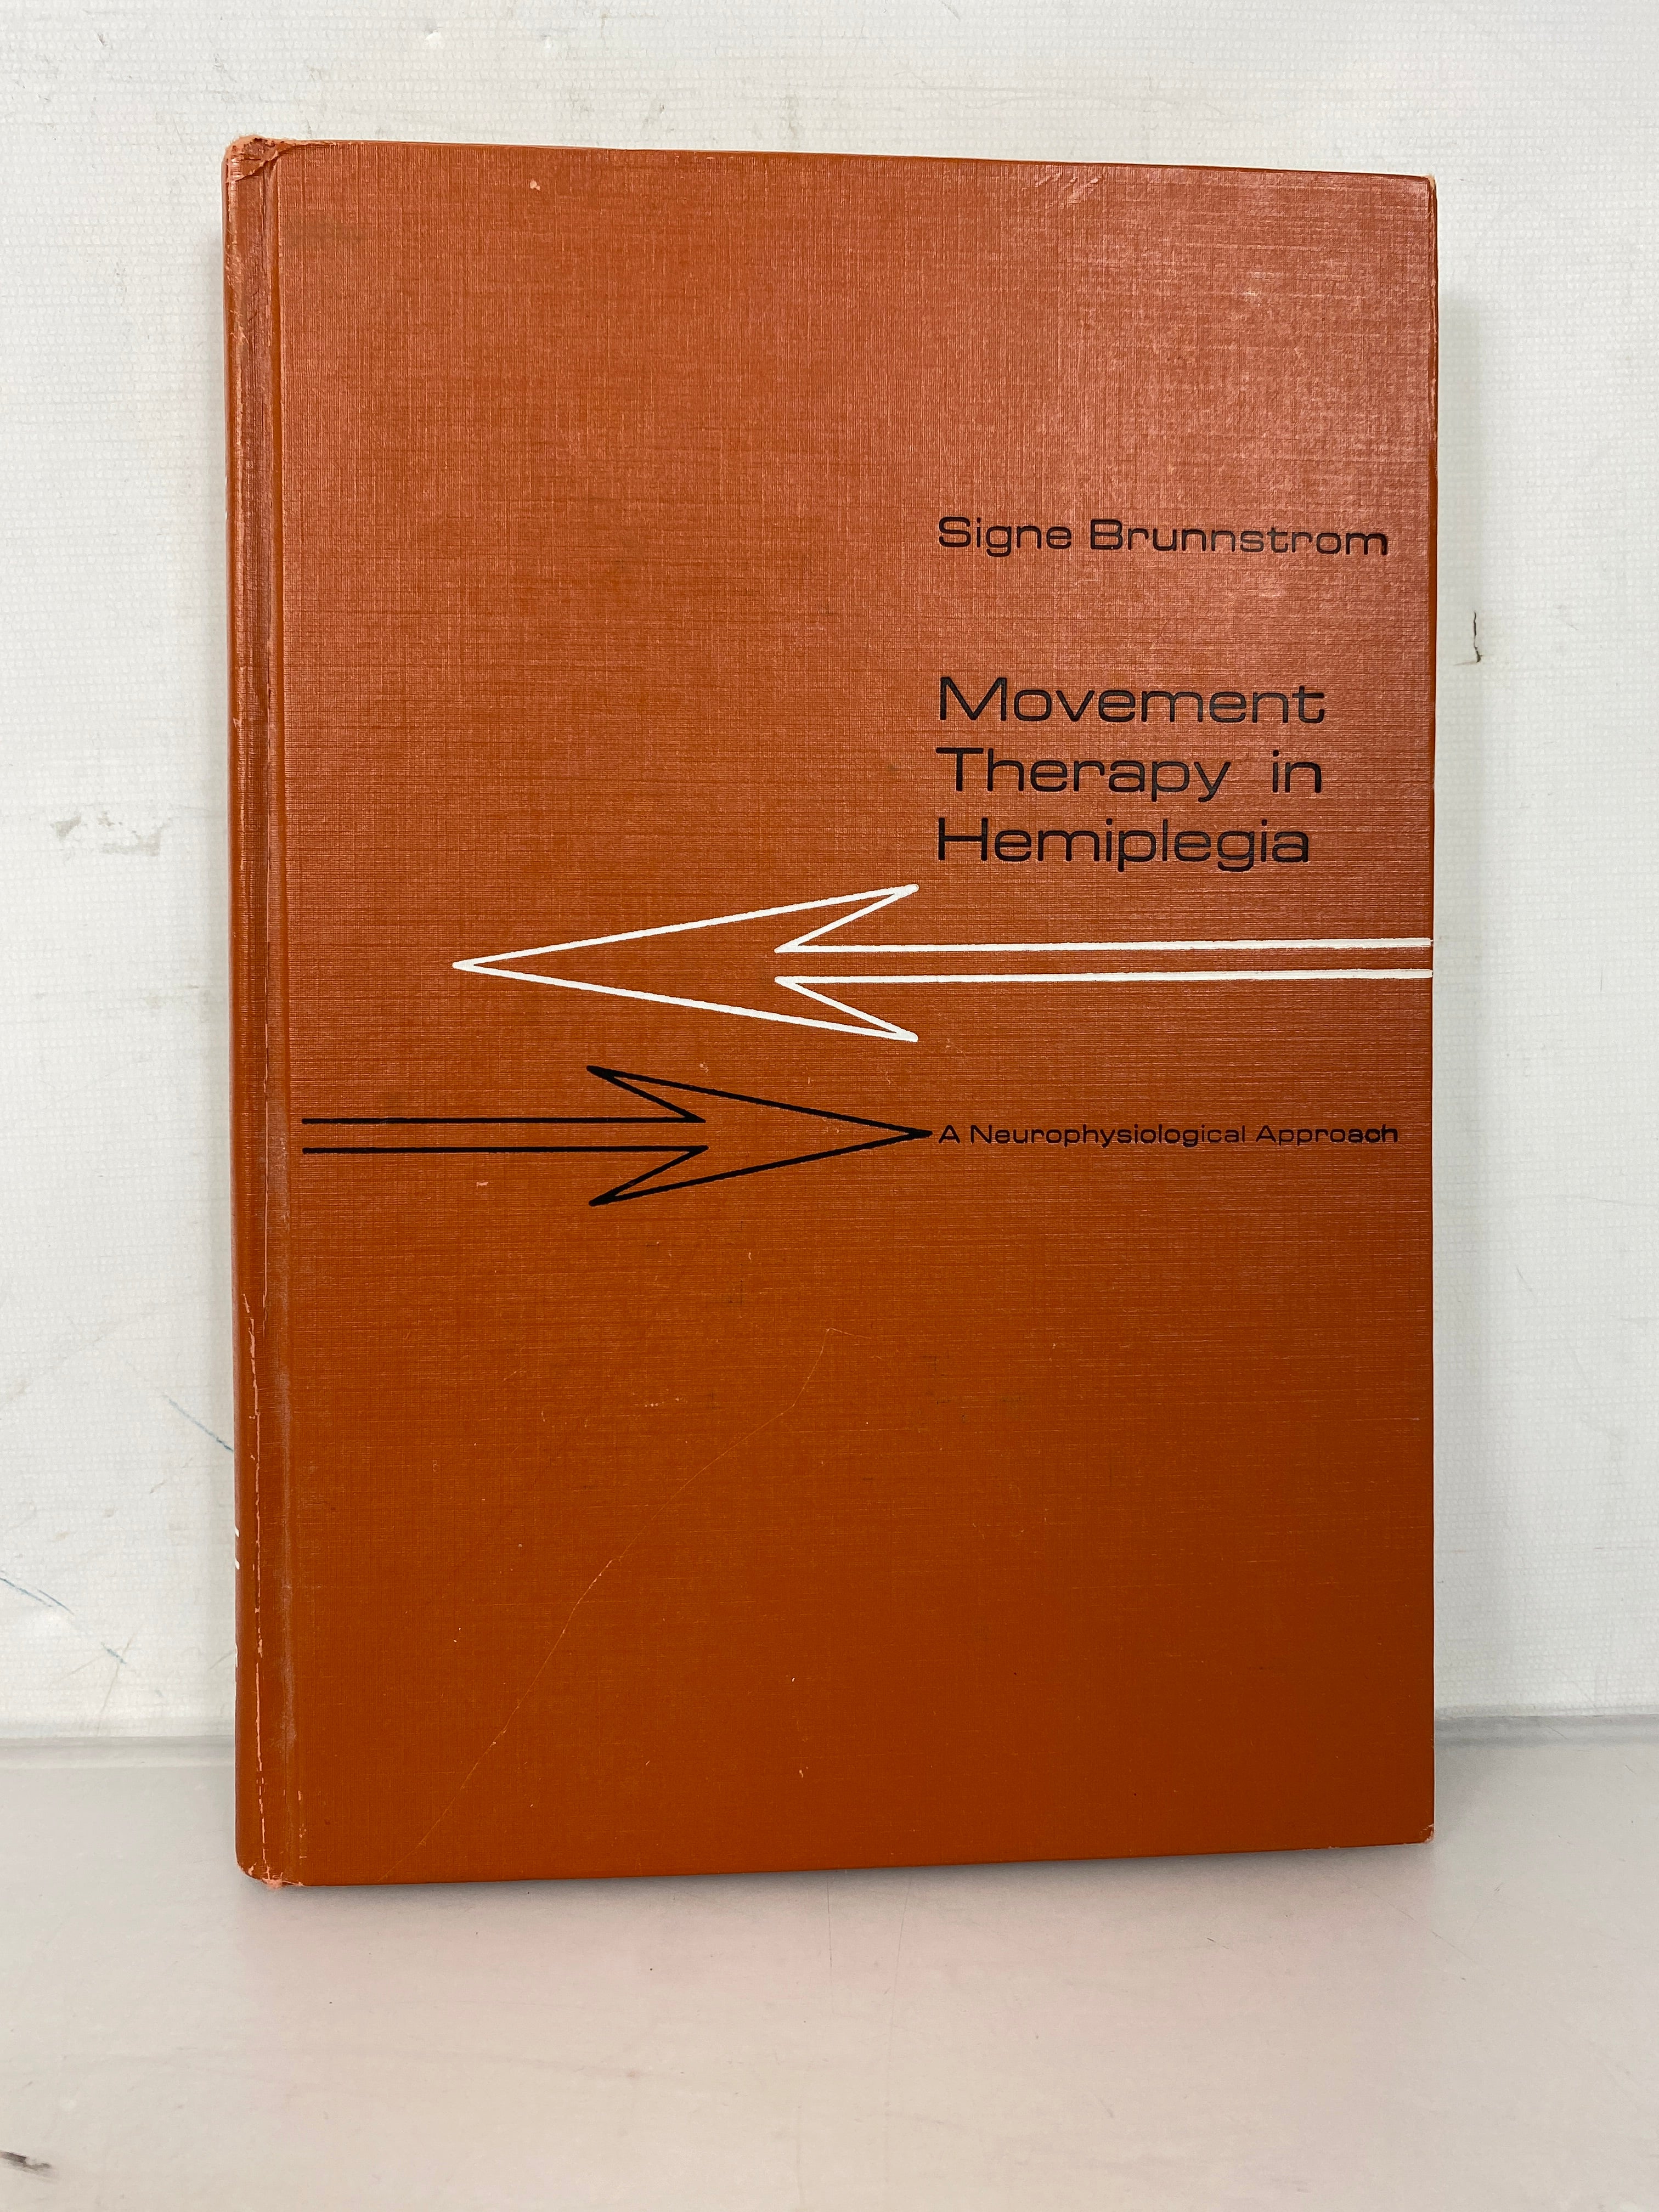 Movement Therapy in Hemiplegia by Signe Brunnstrom 1970 First Edition HC